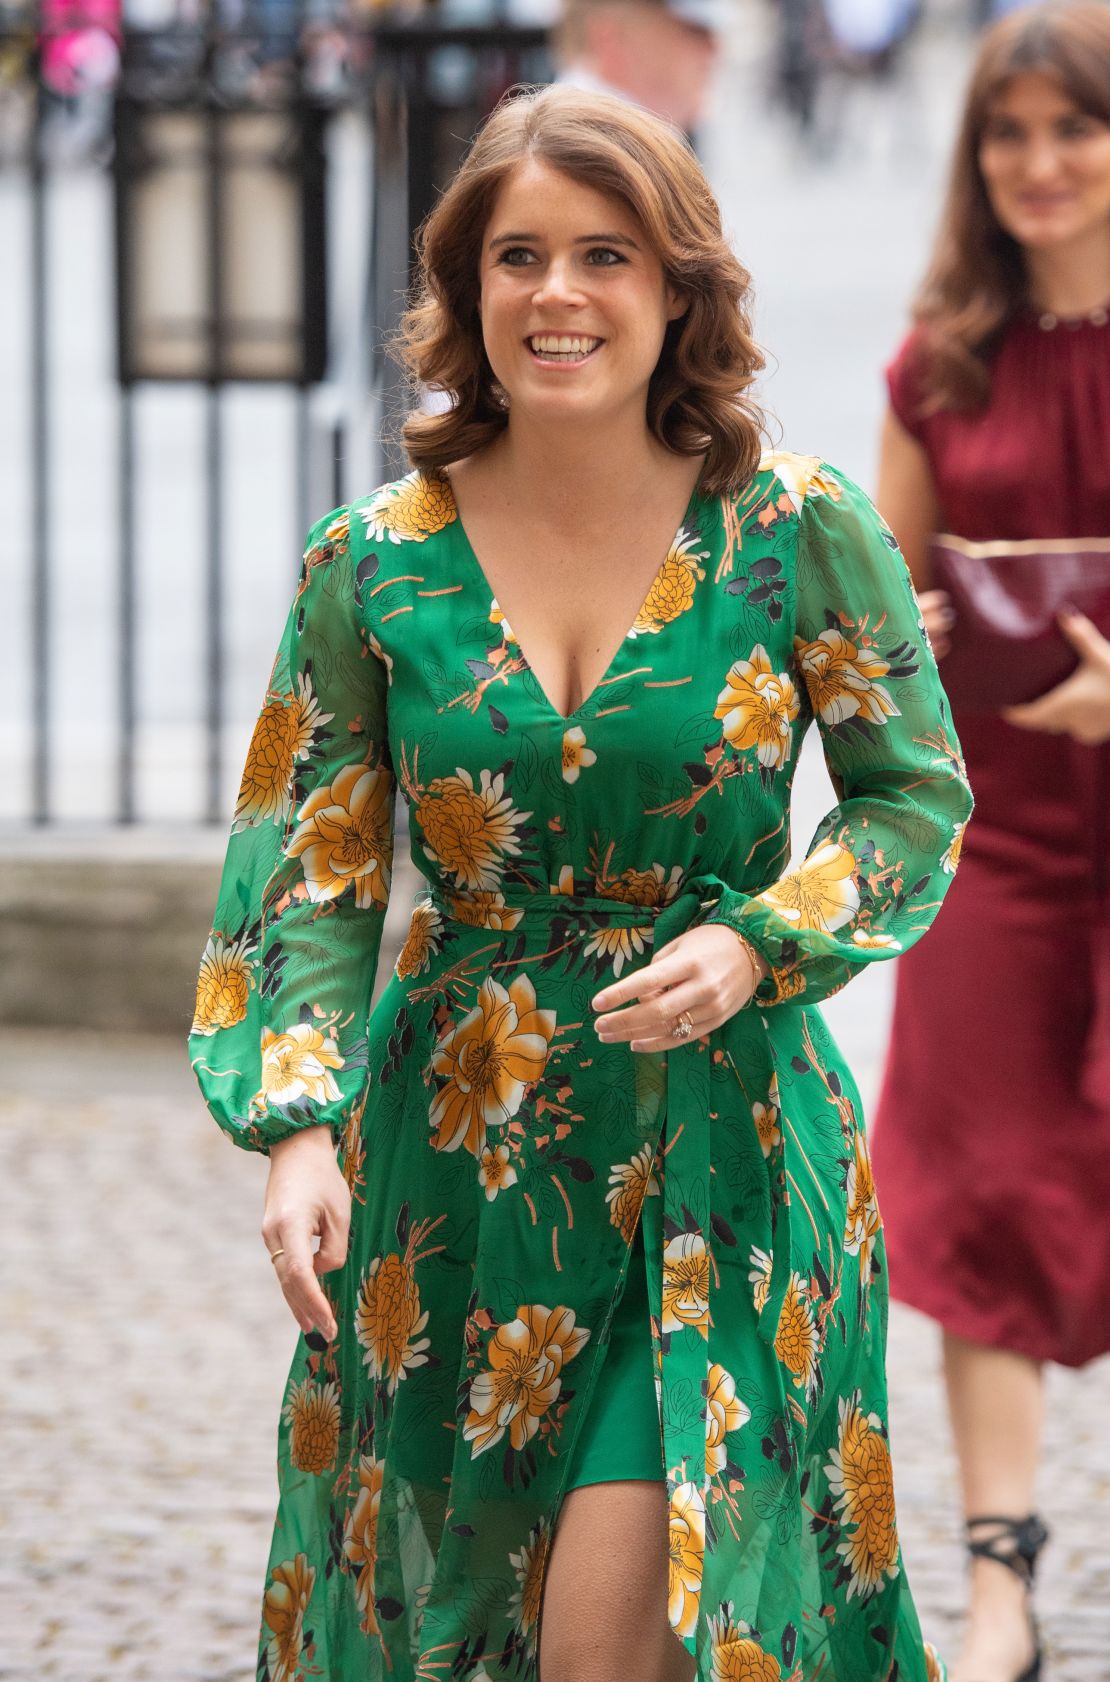 Princess Eugenie, pictured in 2019 at Westminster Abbey during a day on combating modern slavery.